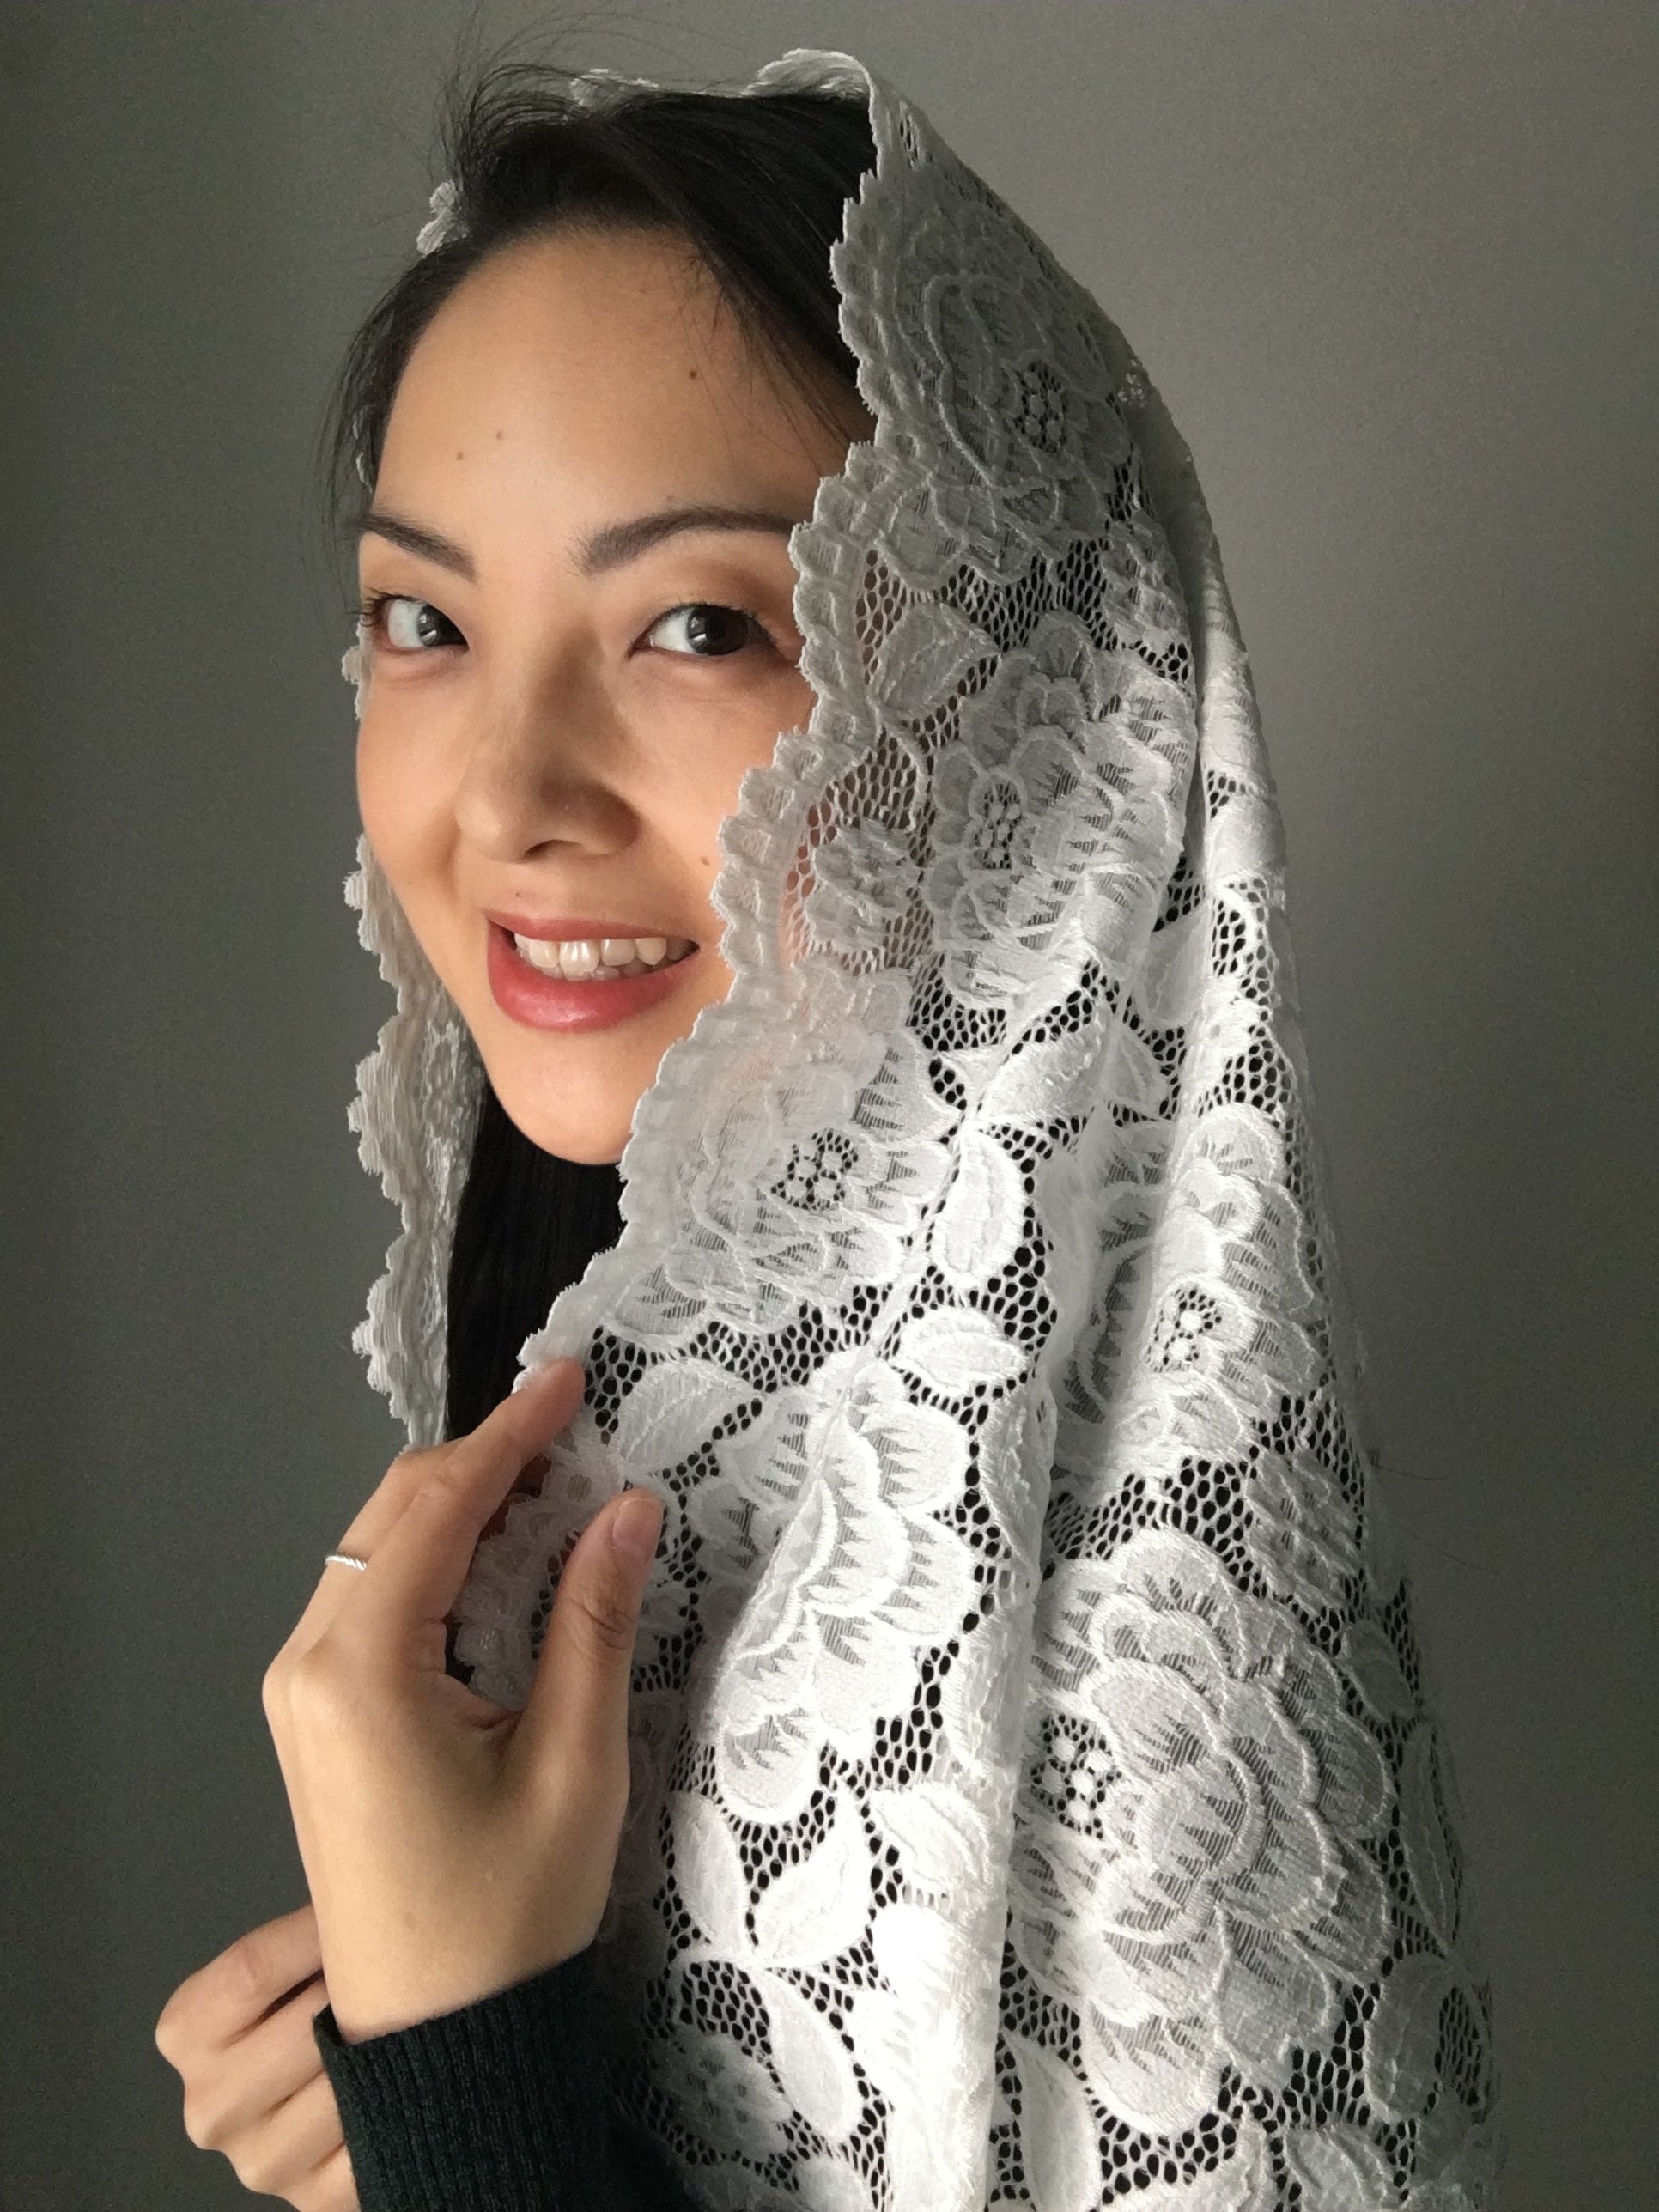 Evintage Veils~ Traditional Soft Lace French Chapel Veil Mantilla: Infinity or D Shape, Ivory or Black